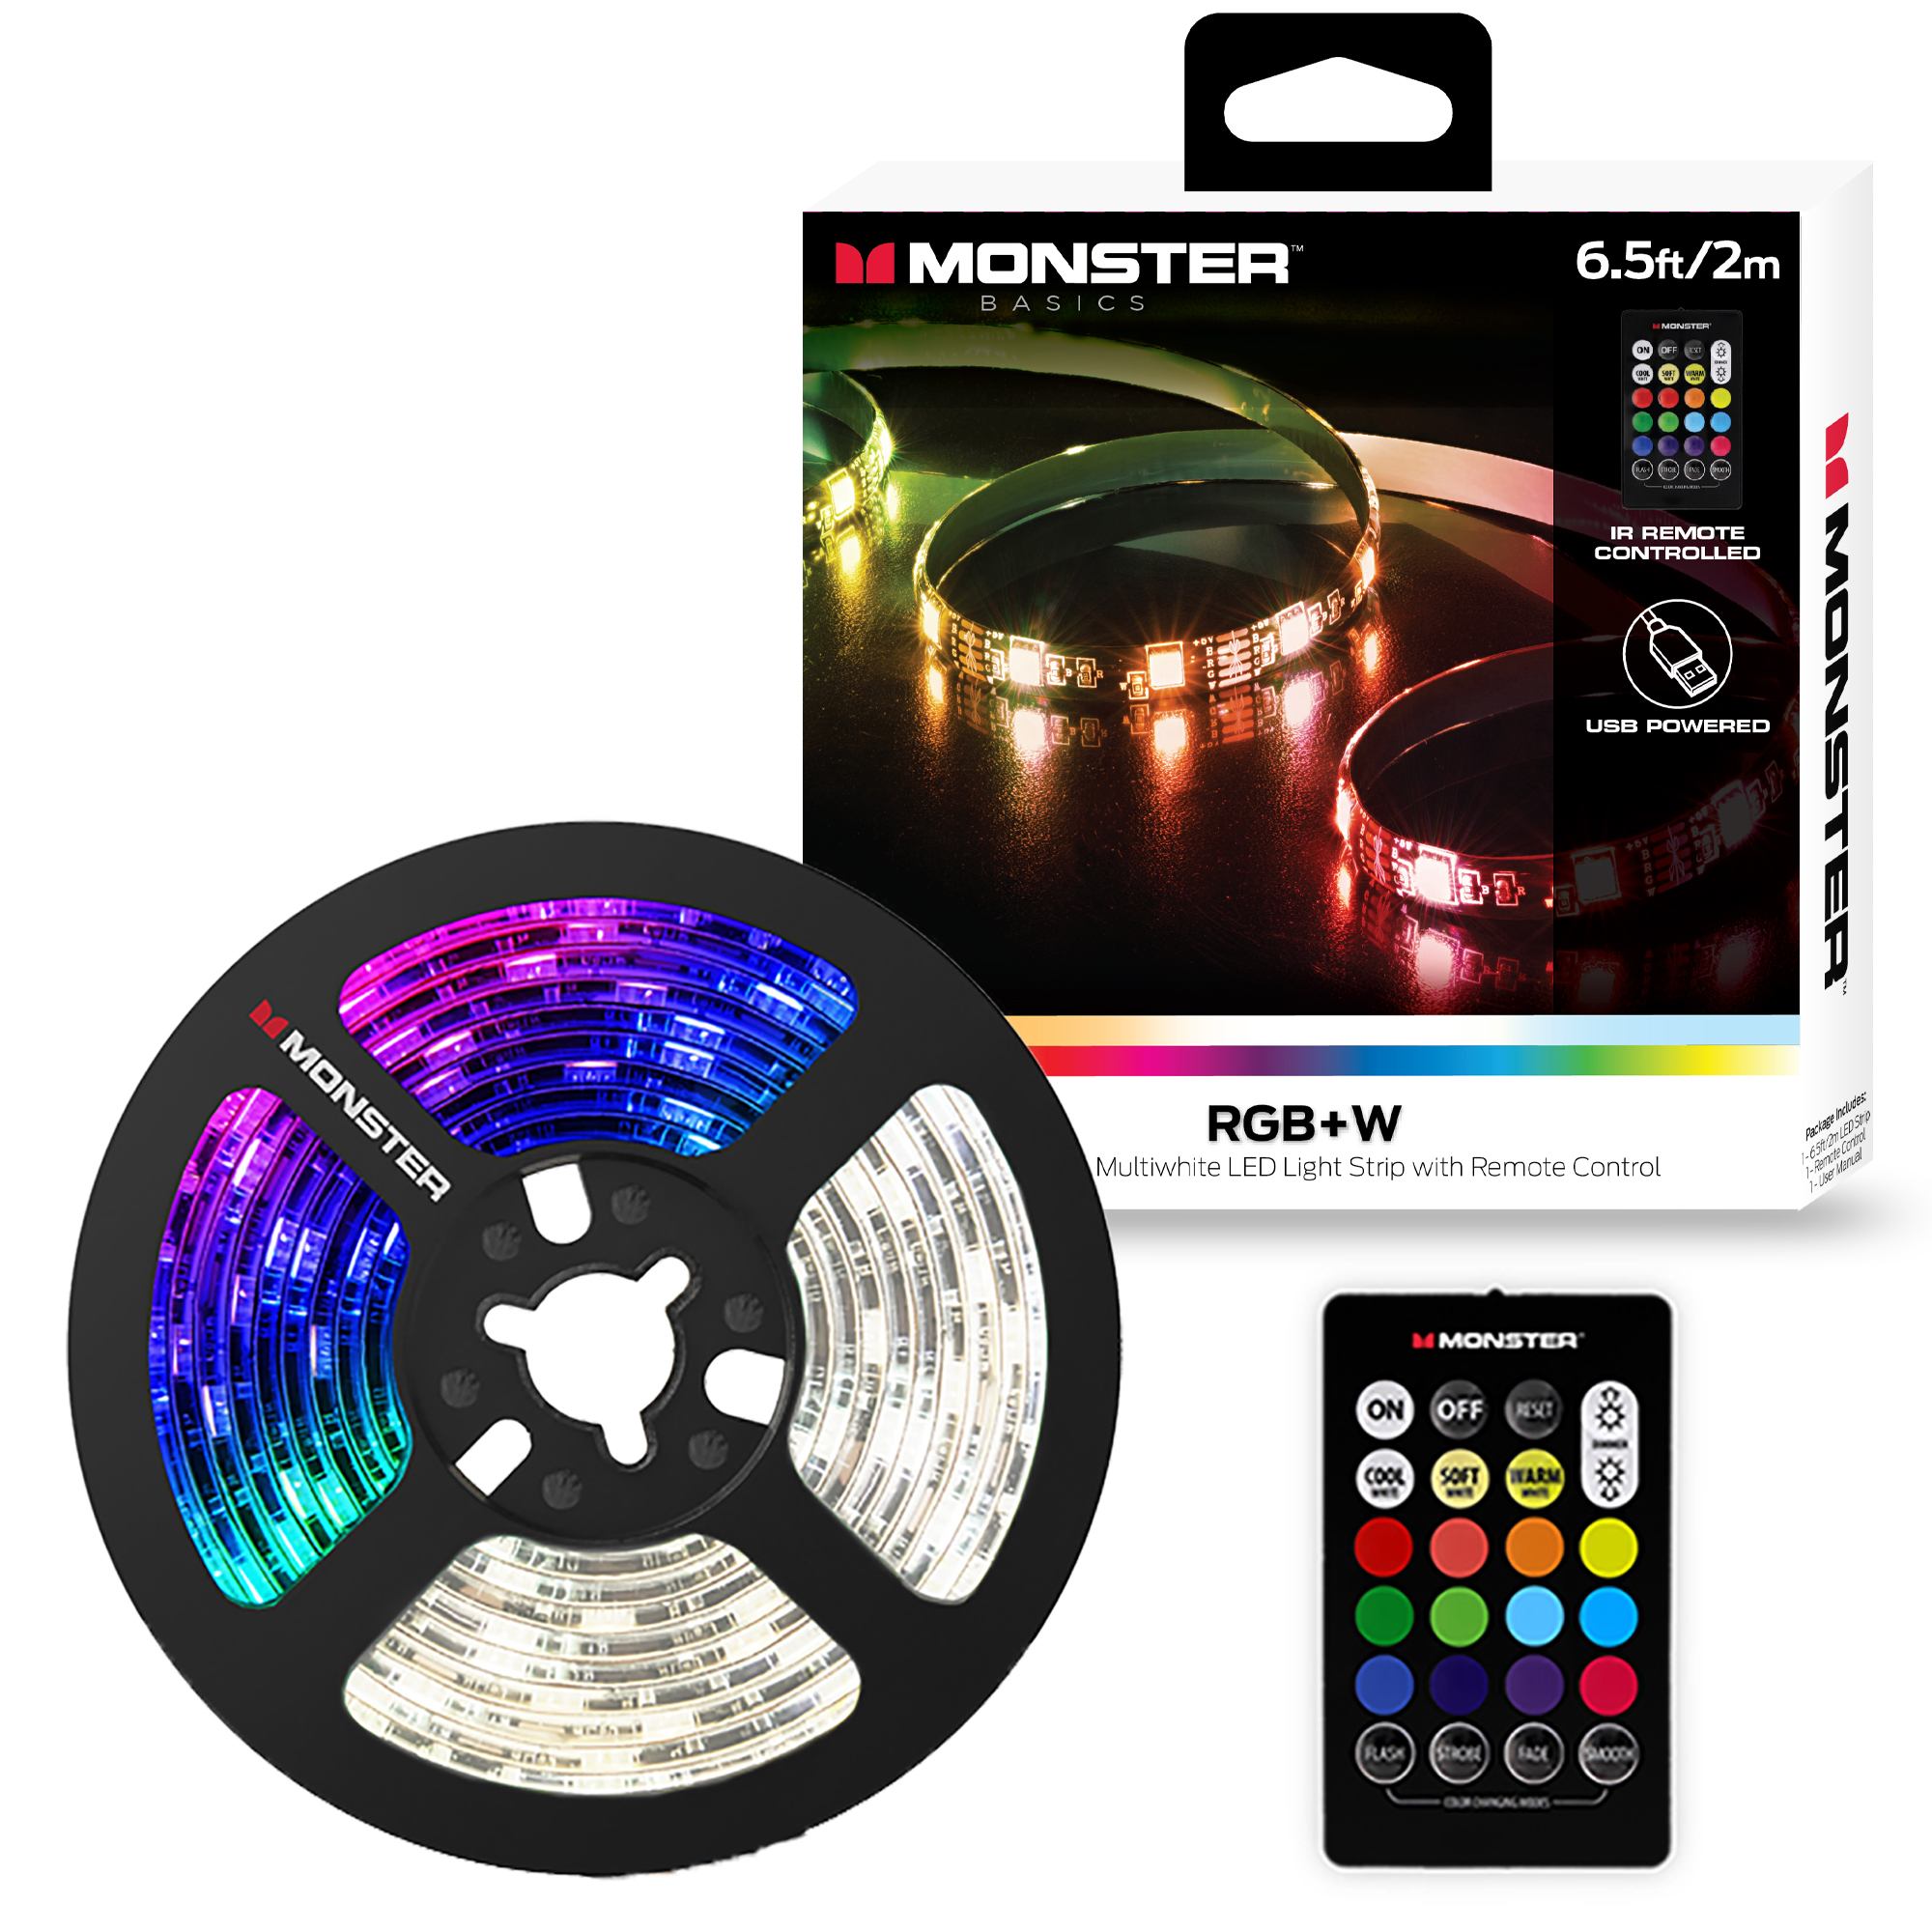 6.5 and LED Strip, Remote control - Monster Illuminessence